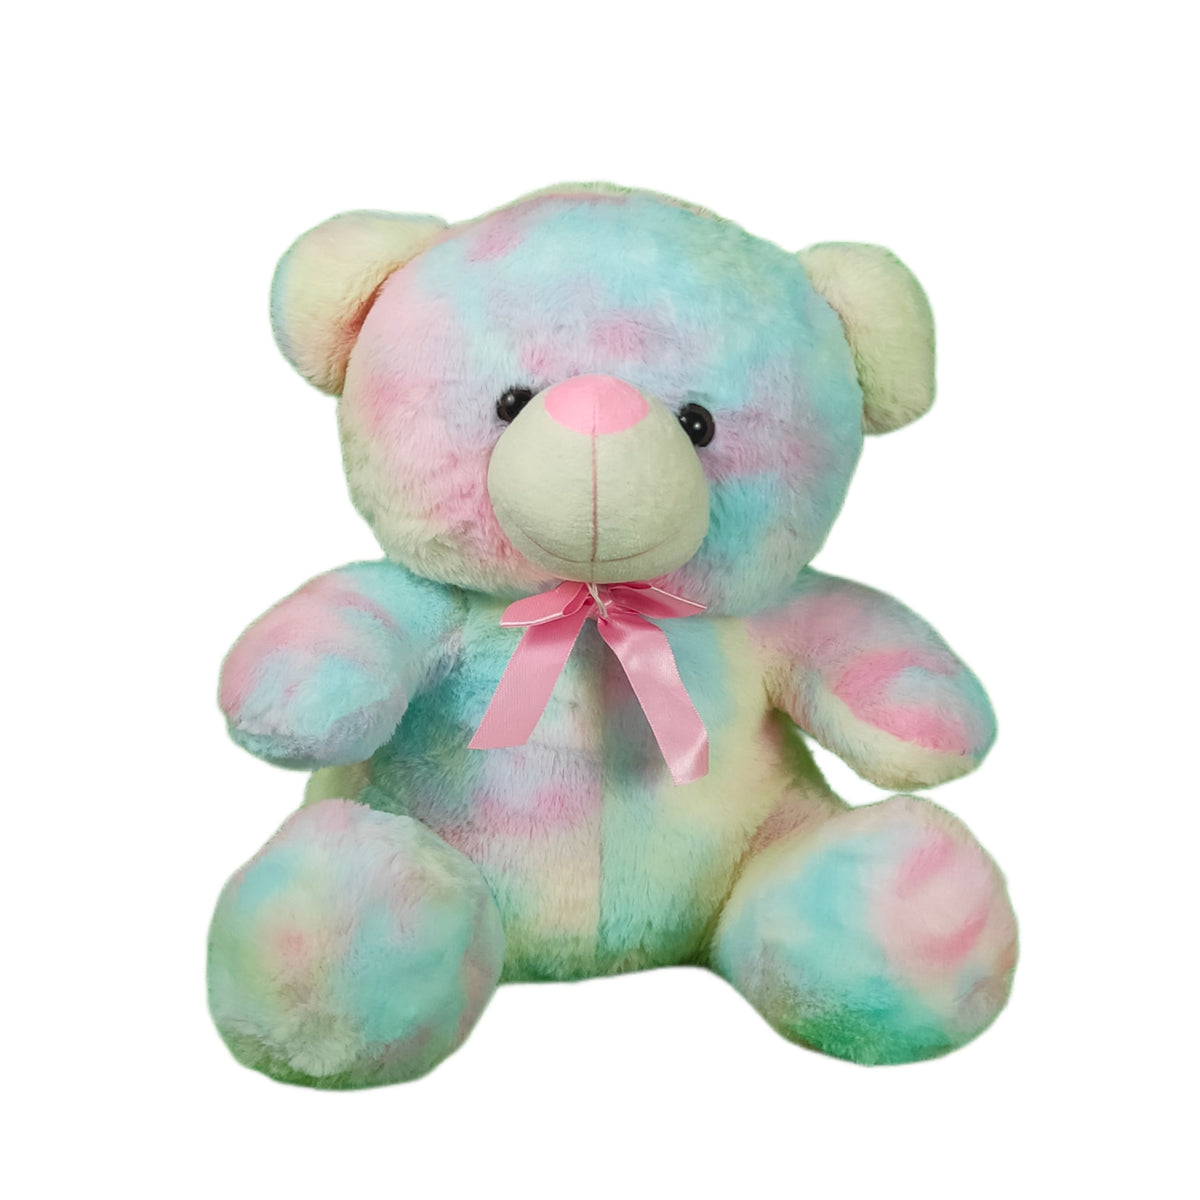 Play Hour Rainbow Bear Plush Soft Toy for Ages 3 Years and Up, 40cm